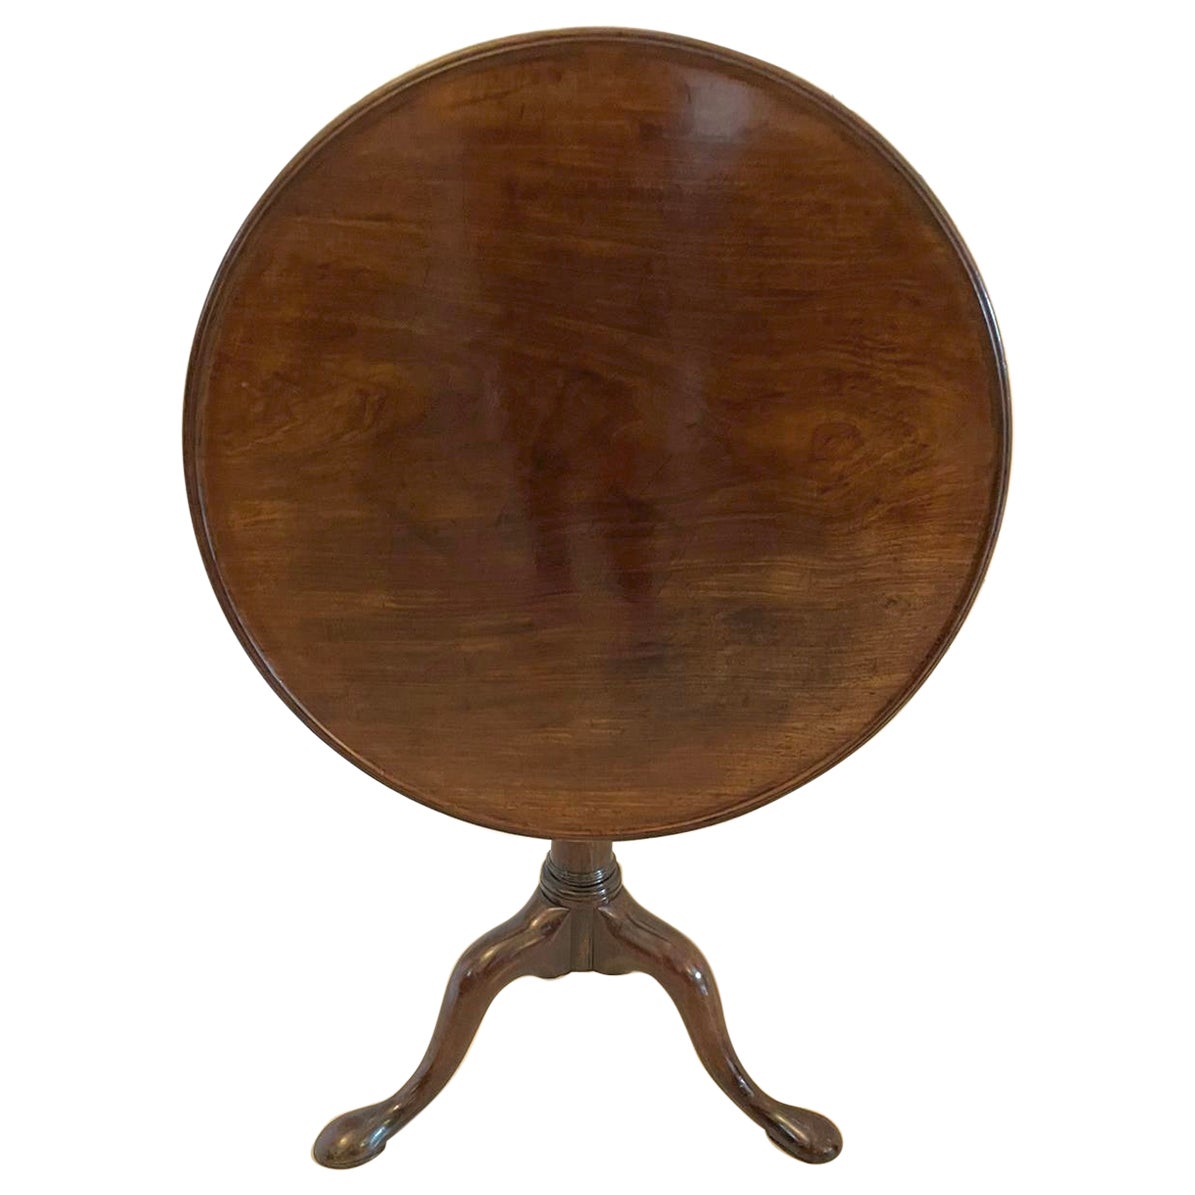 Antique George III 18th Century Quality Figured Mahogany Dish Top Tripod Table For Sale